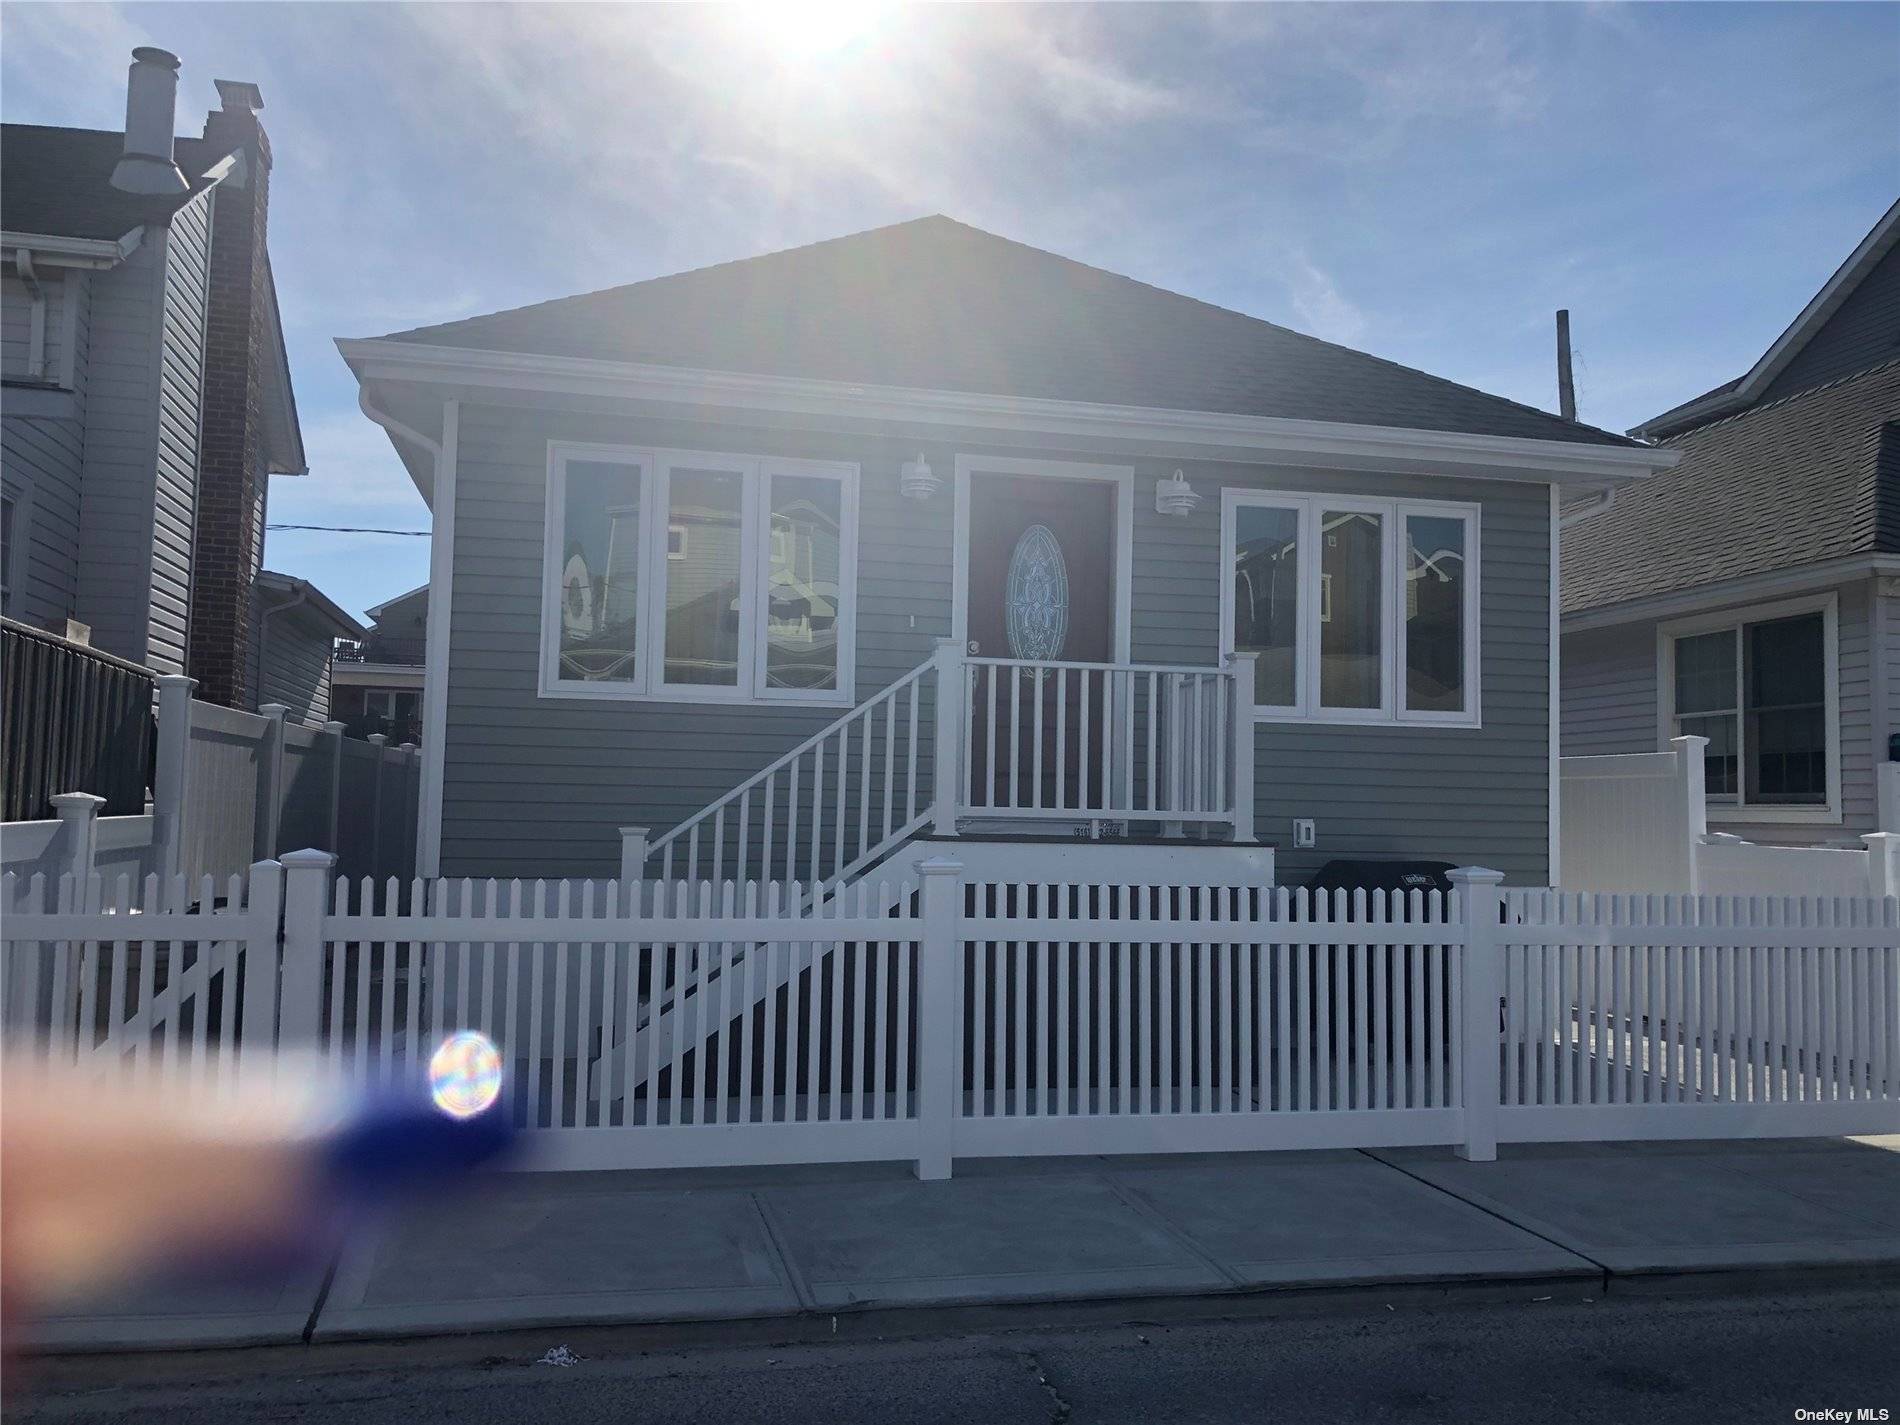 Stunning completely remodeled from top bottom 2 bedroom 1bath Beach House with open floor plan, hardwood floors, high ceilings new kit with stainless steel appliances new bathroom ductless ac units ...